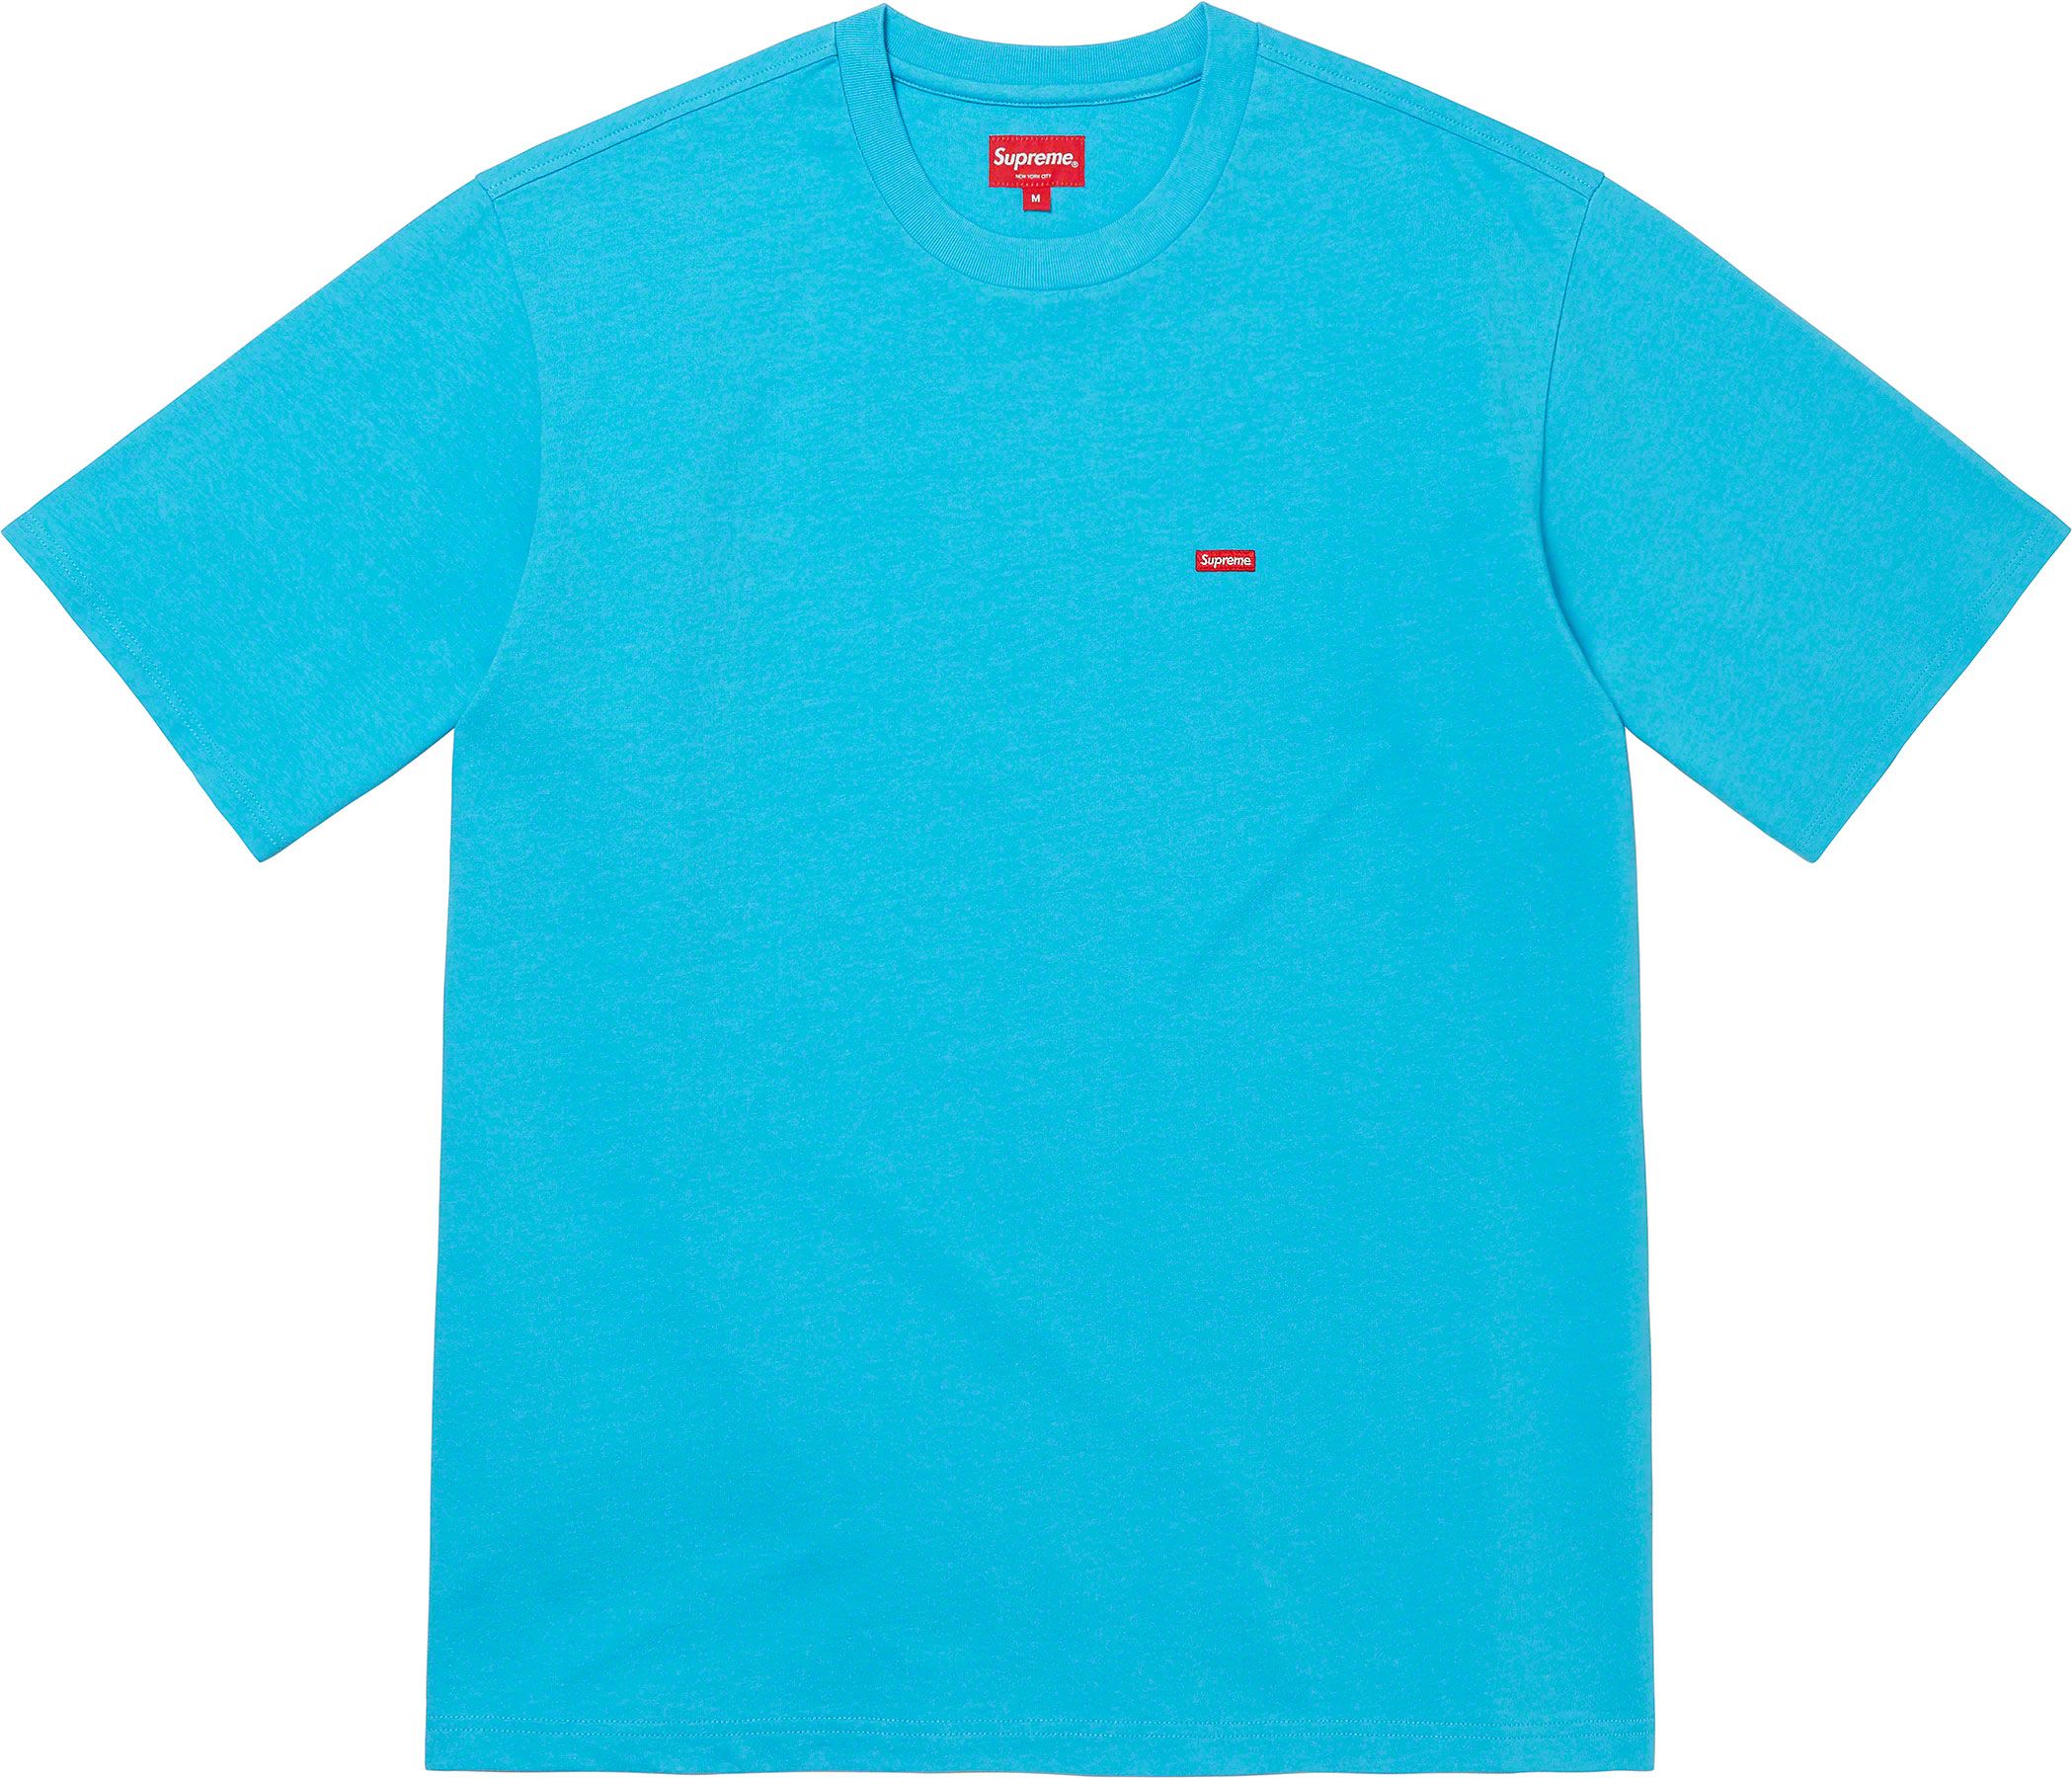 Supreme time tee Dusty teal M